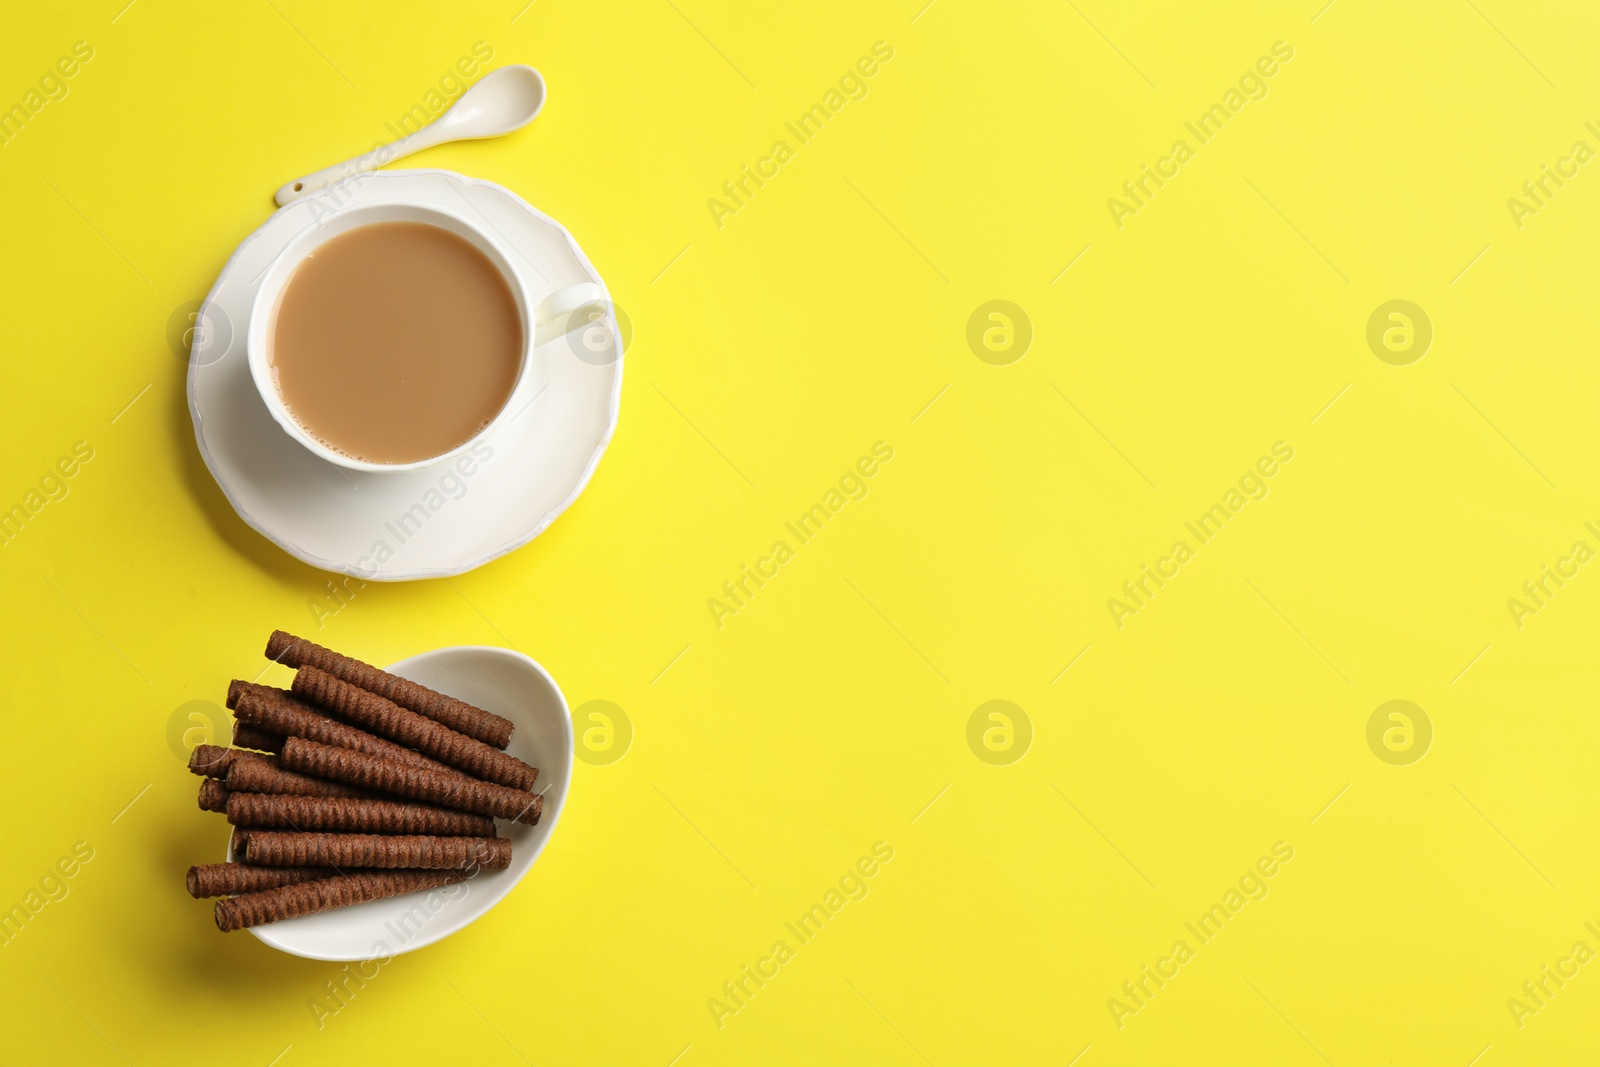 Photo of Delicious chocolate wafer rolls and cup of coffee on color background, top view with space for text. Sweet food